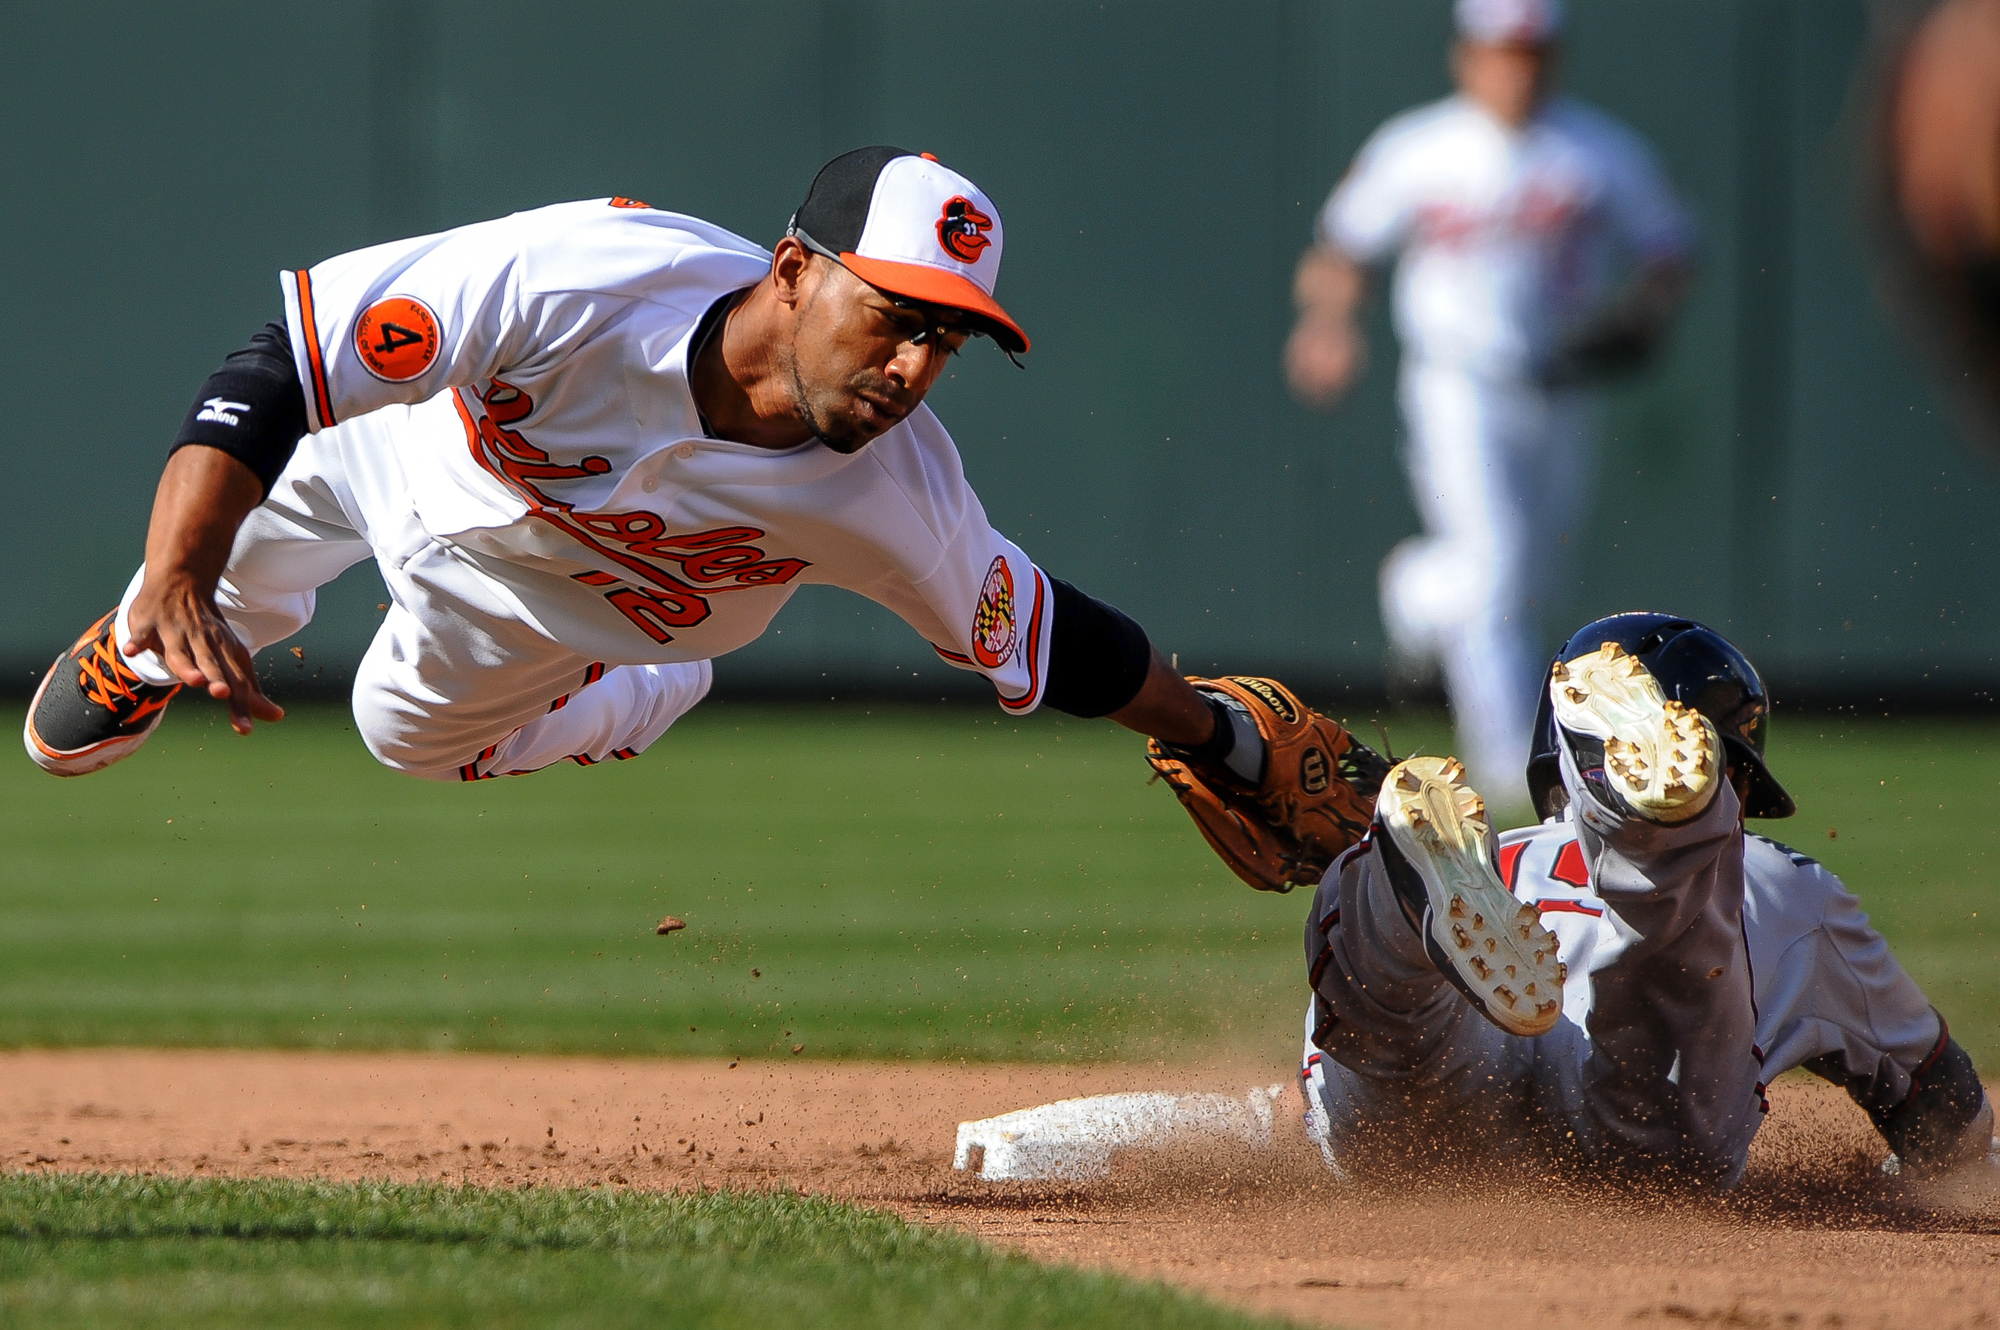  Baltimore Orioles second baseman Alexi Casillas makes the tag in the top of the fifth inning against the Minnesota Twins on April 7, 2013 in Baltimore, Md. 